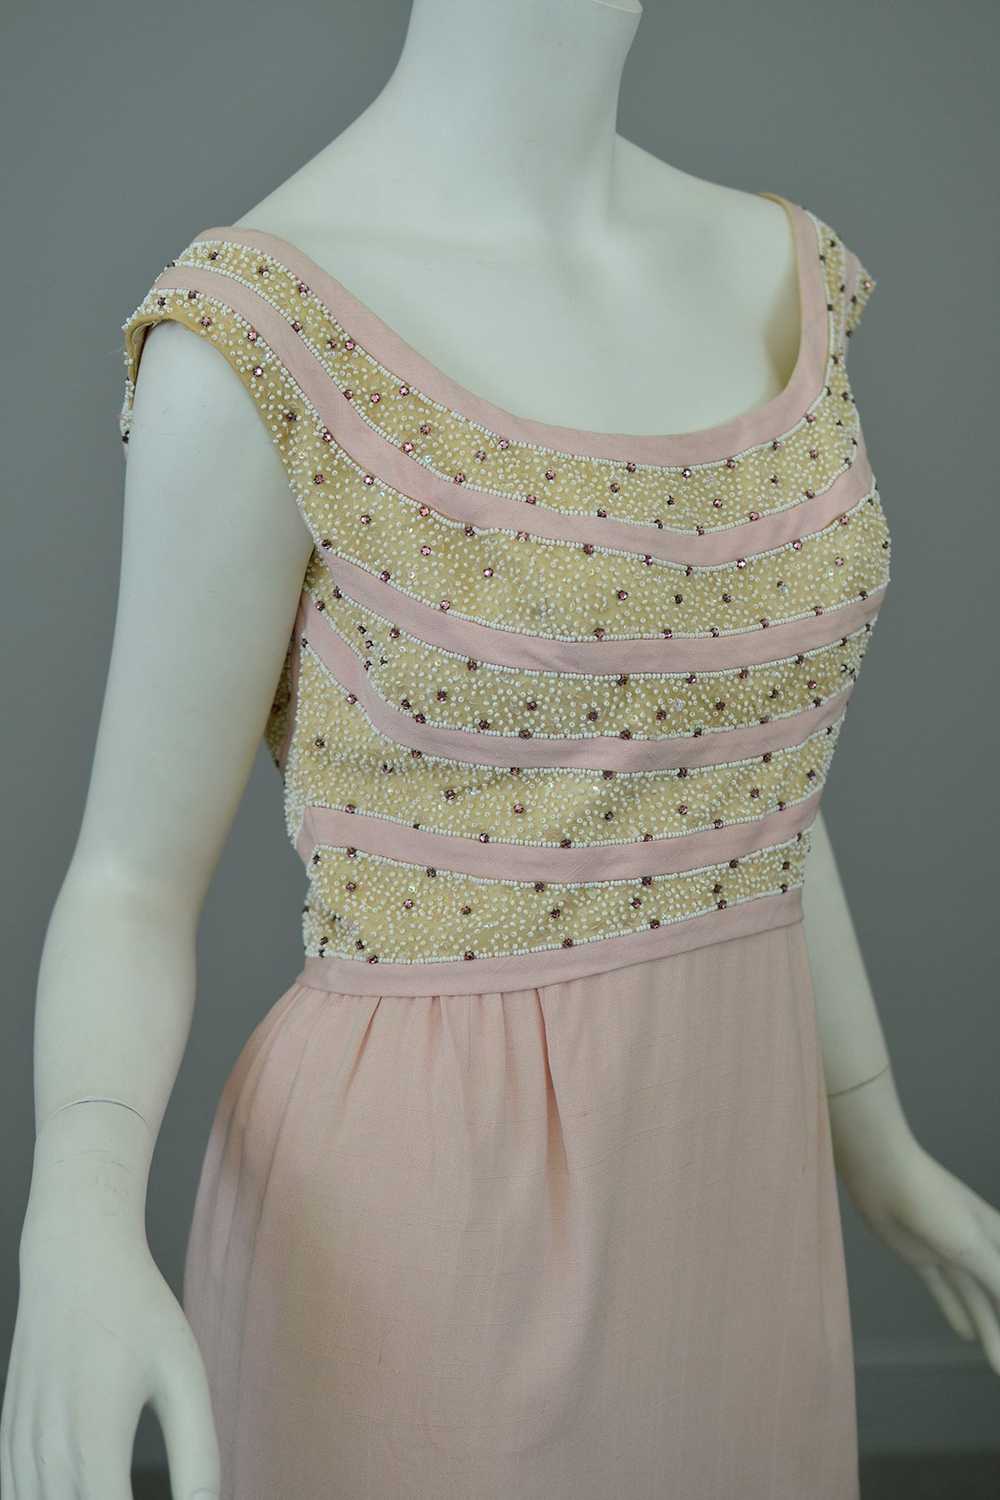 1960s Pale Pink Beaded Short Cocktail Dress - image 3